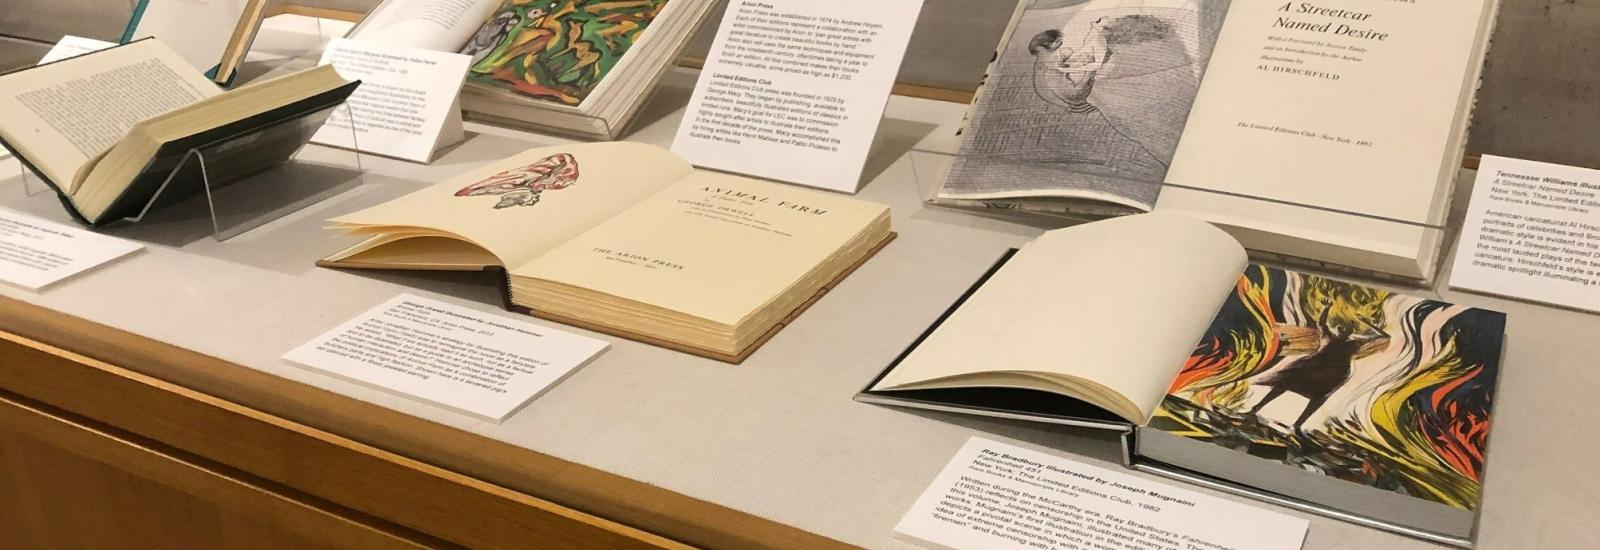 Rare books on display in cabinet with labels